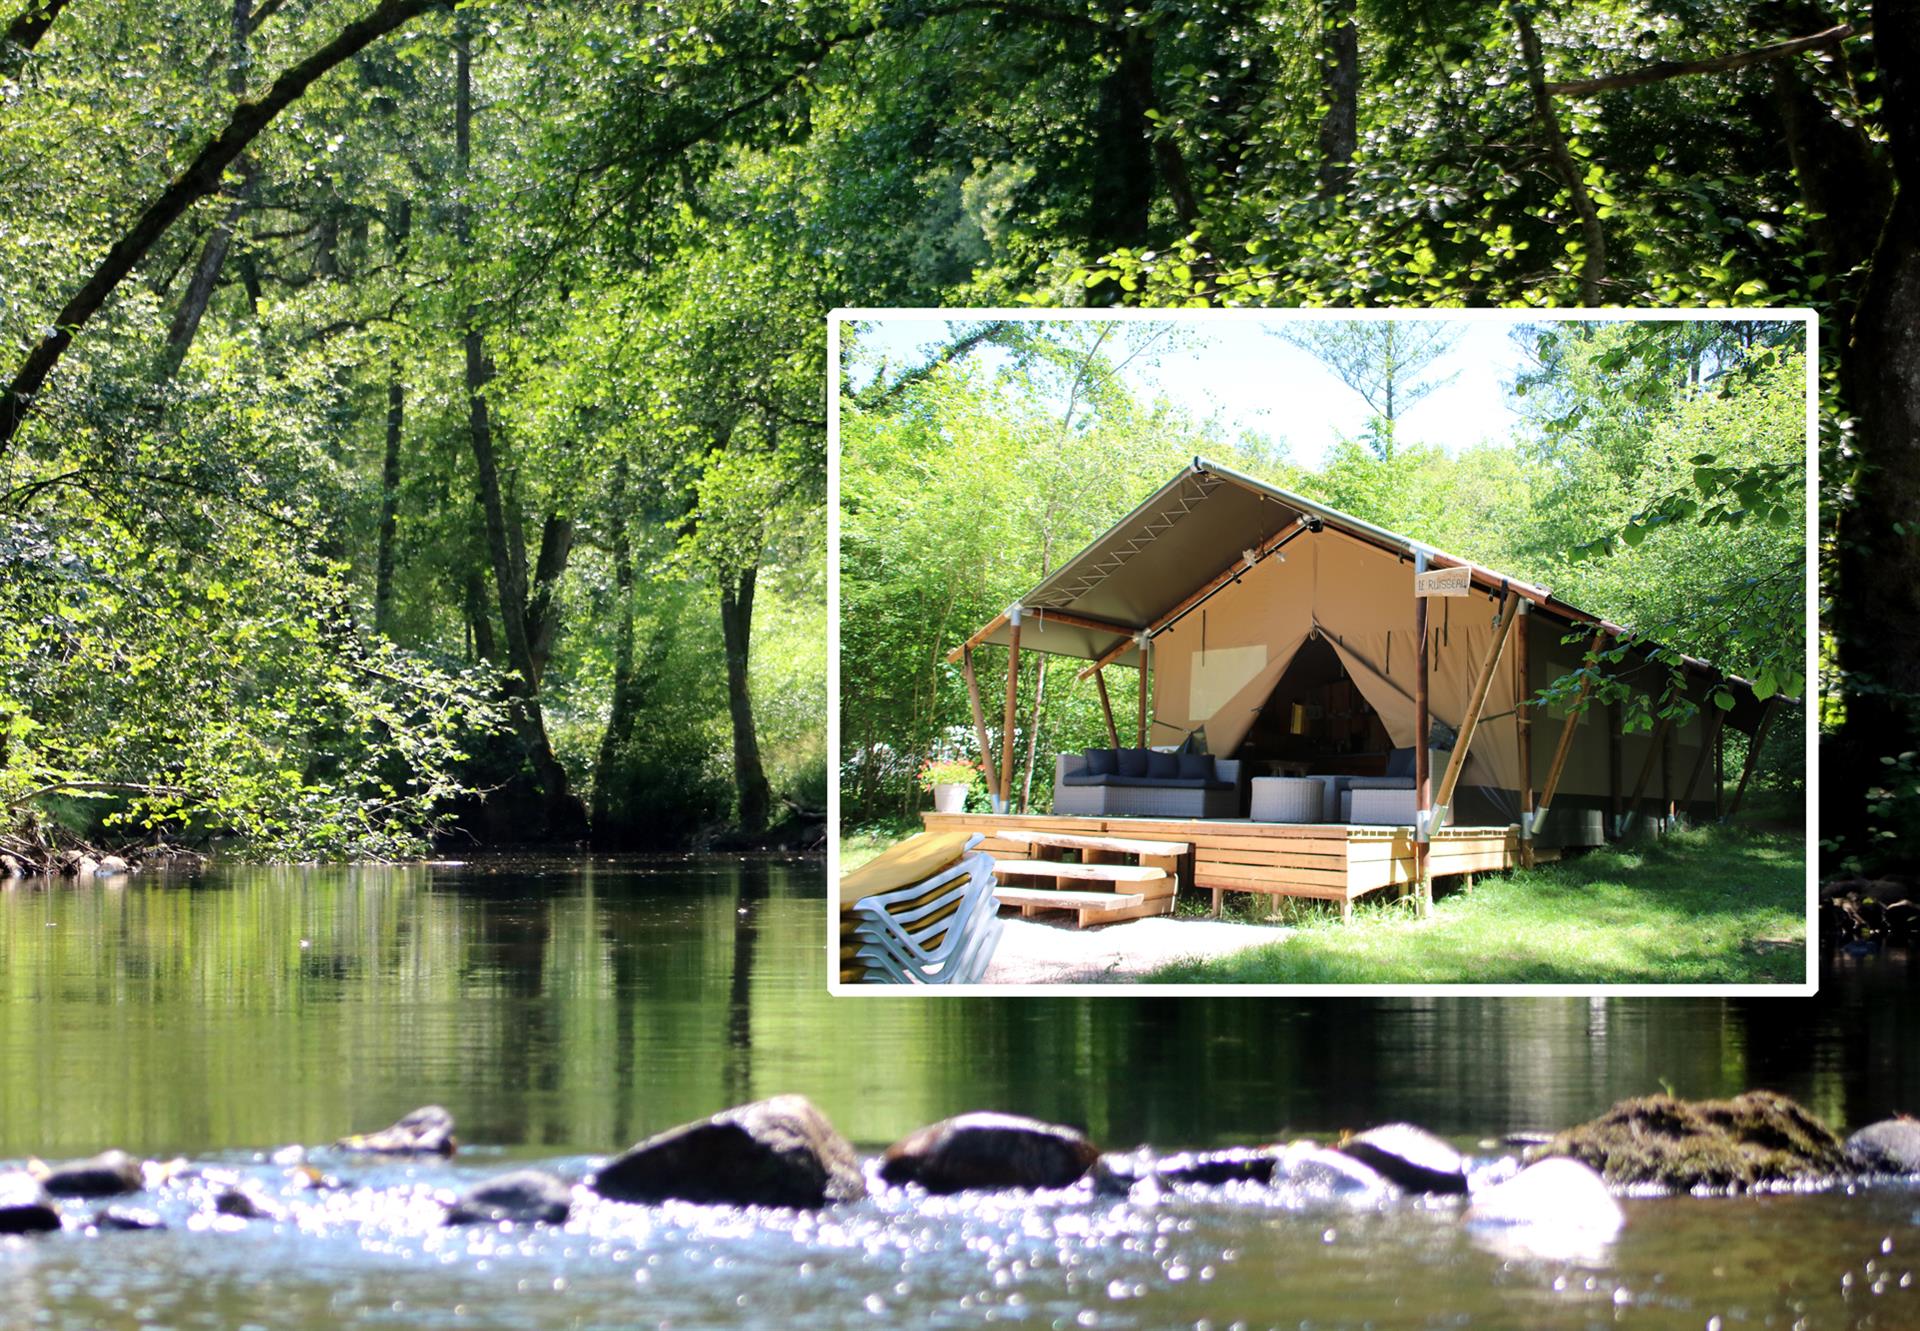 Small-scale holiday park by a river